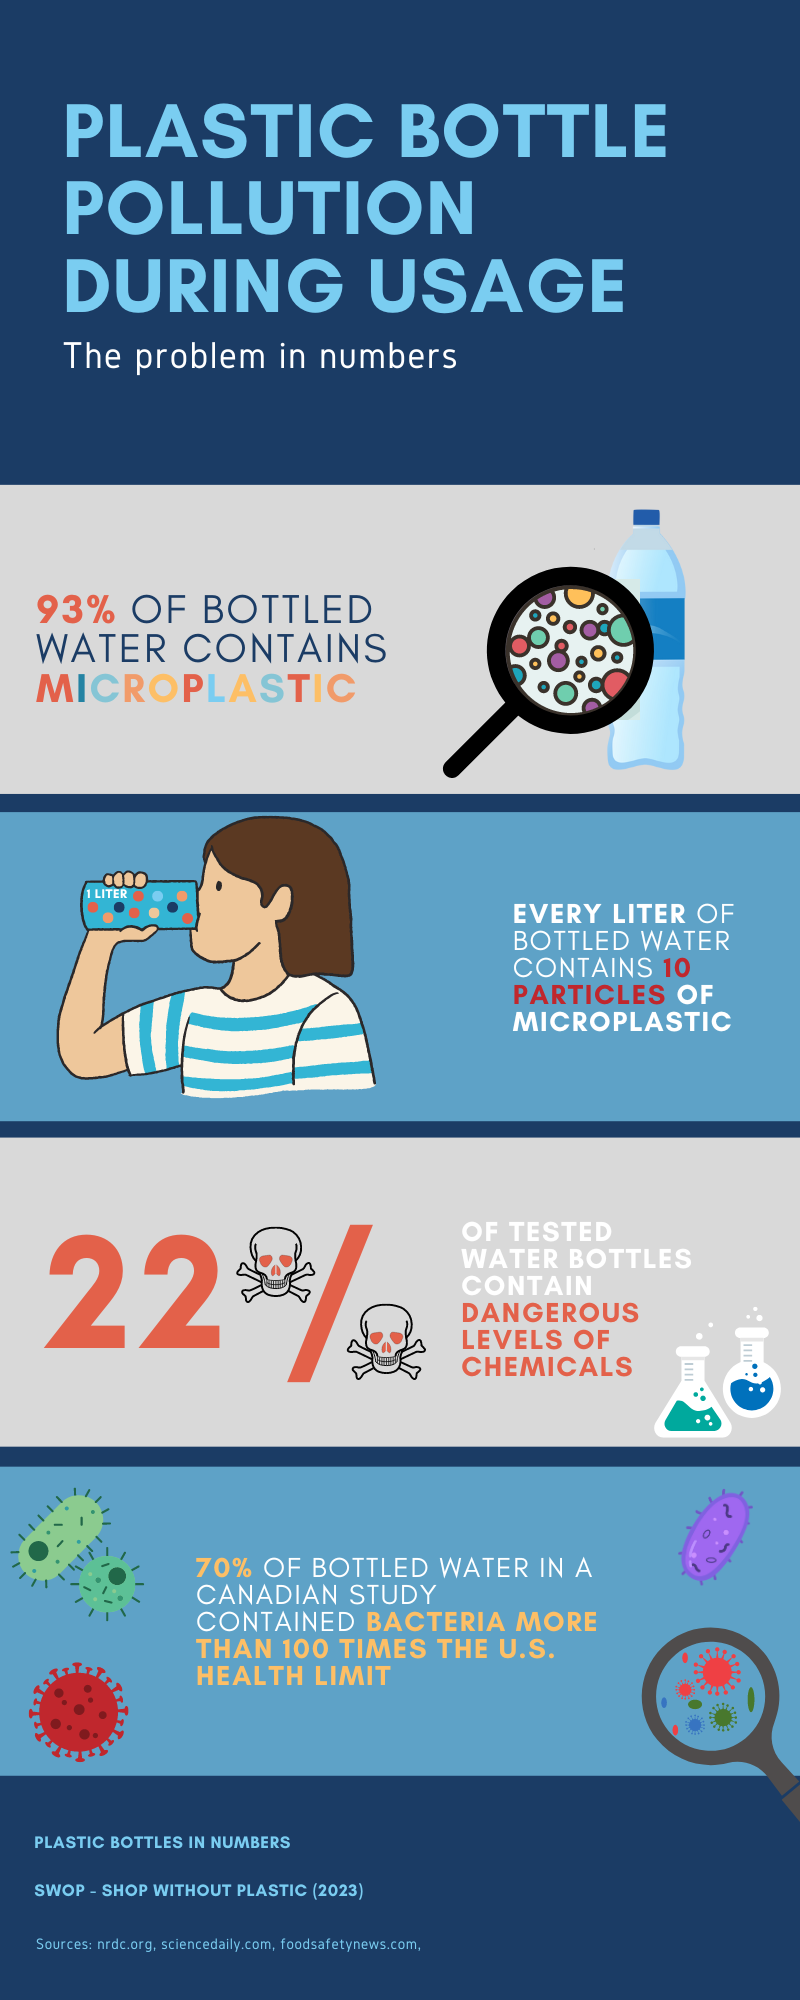 water bottle pollution during usage